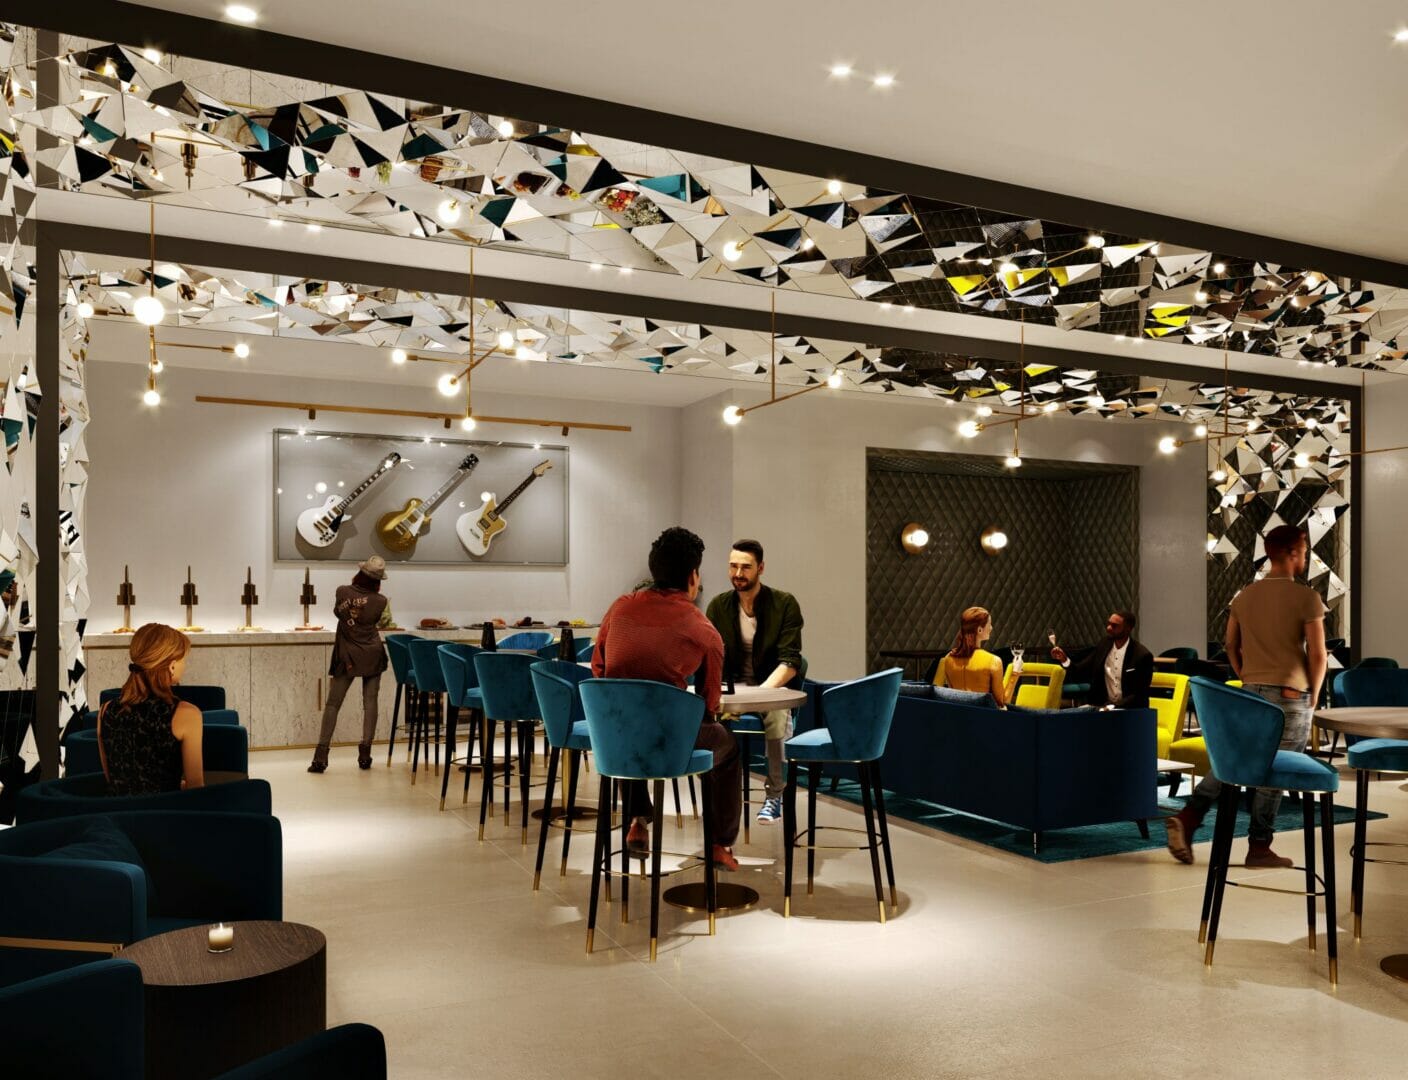 LESS THAN 100 DAYS UNTIL HARD ROCK HOTEL LONDON OFFICIALLY OPENS ITS DOORS – MAKING ITS MARK ON OXFORD STREET